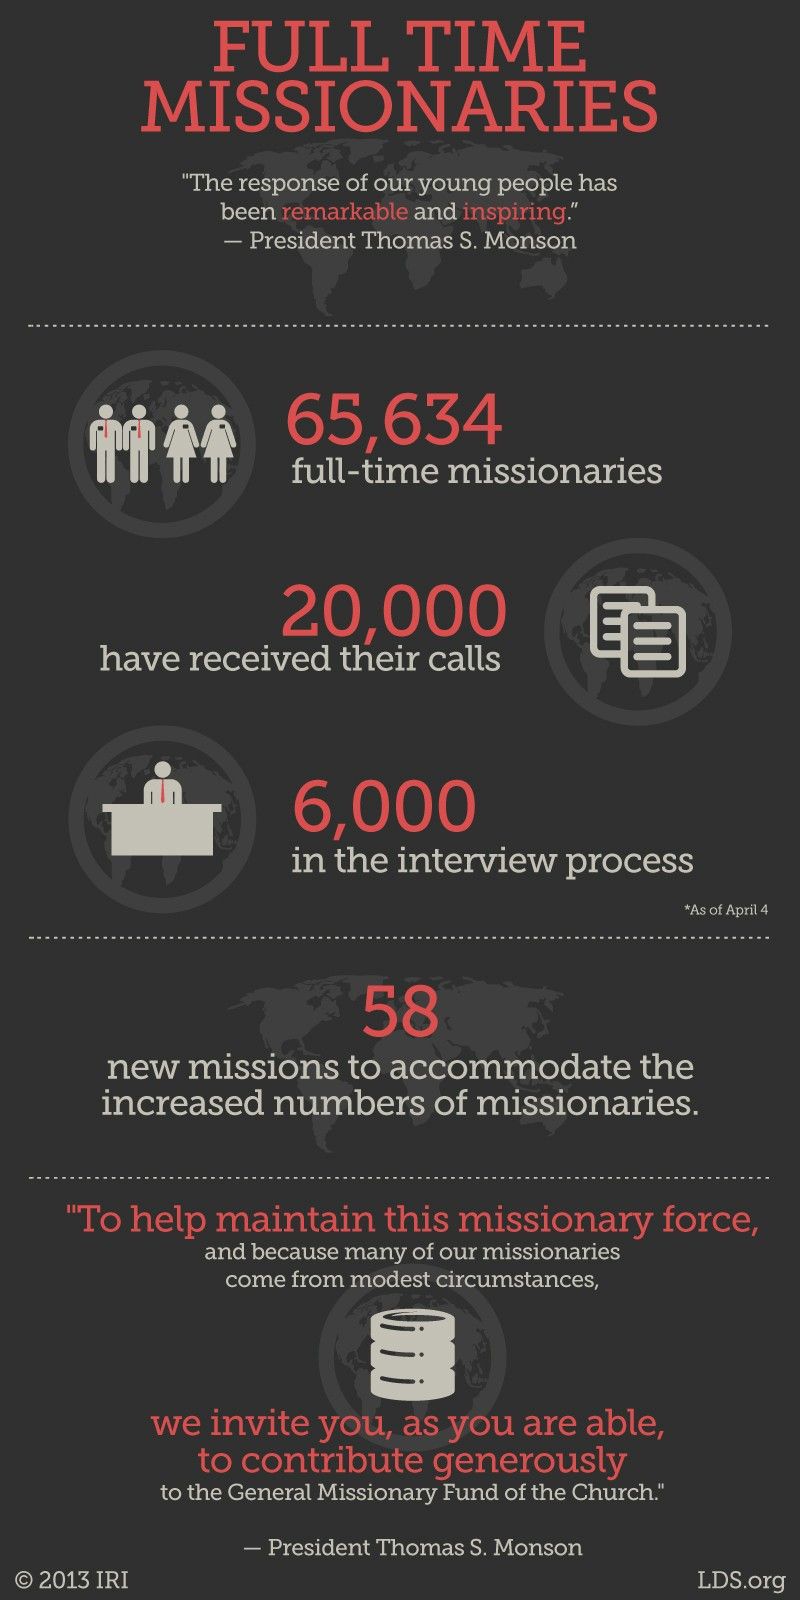 “The response of our young people has been remarkable and inspiring. As of April 4—two days ago—we have 65,634 full-time missionaries serving, with over 20,000 more who have received their calls but who have not yet entered a missionary training center and over 6,000 more in the interview process with their bishops and stake presidents. It has been made necessary for us to create 58 new missions to accommodate the increased number of missionaries. To help maintain this missionary force, and because many of our missionaries come from modest circumstances, we invite you, as you are able, to contribute generously to the General Missionary Fund of the Church.”—President Thomas S. Monson, “Welcome to Conference”